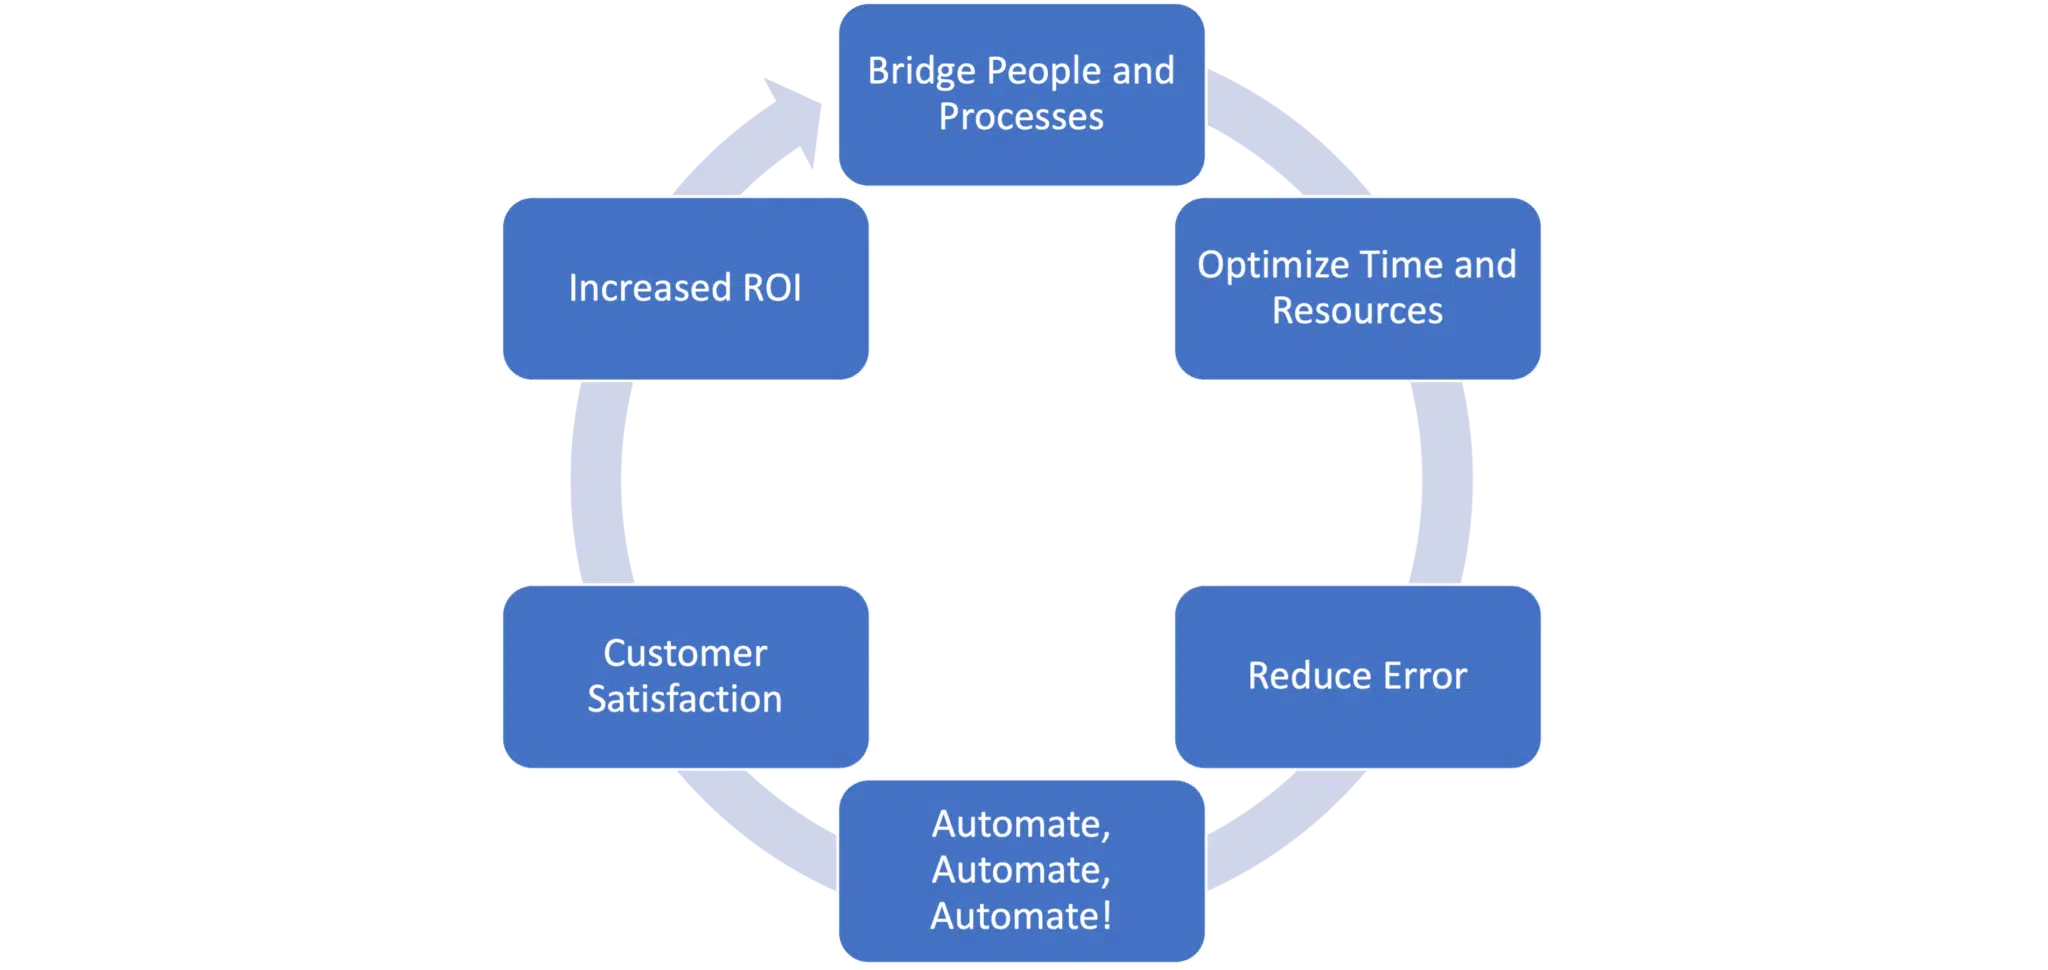 Image is a circular graph listing Intelligence Automation benefits. Bridge People and Processes, Optimize Time and Resources, Reduce Error, Automate, Customer Satisfaction, Increase ROI.